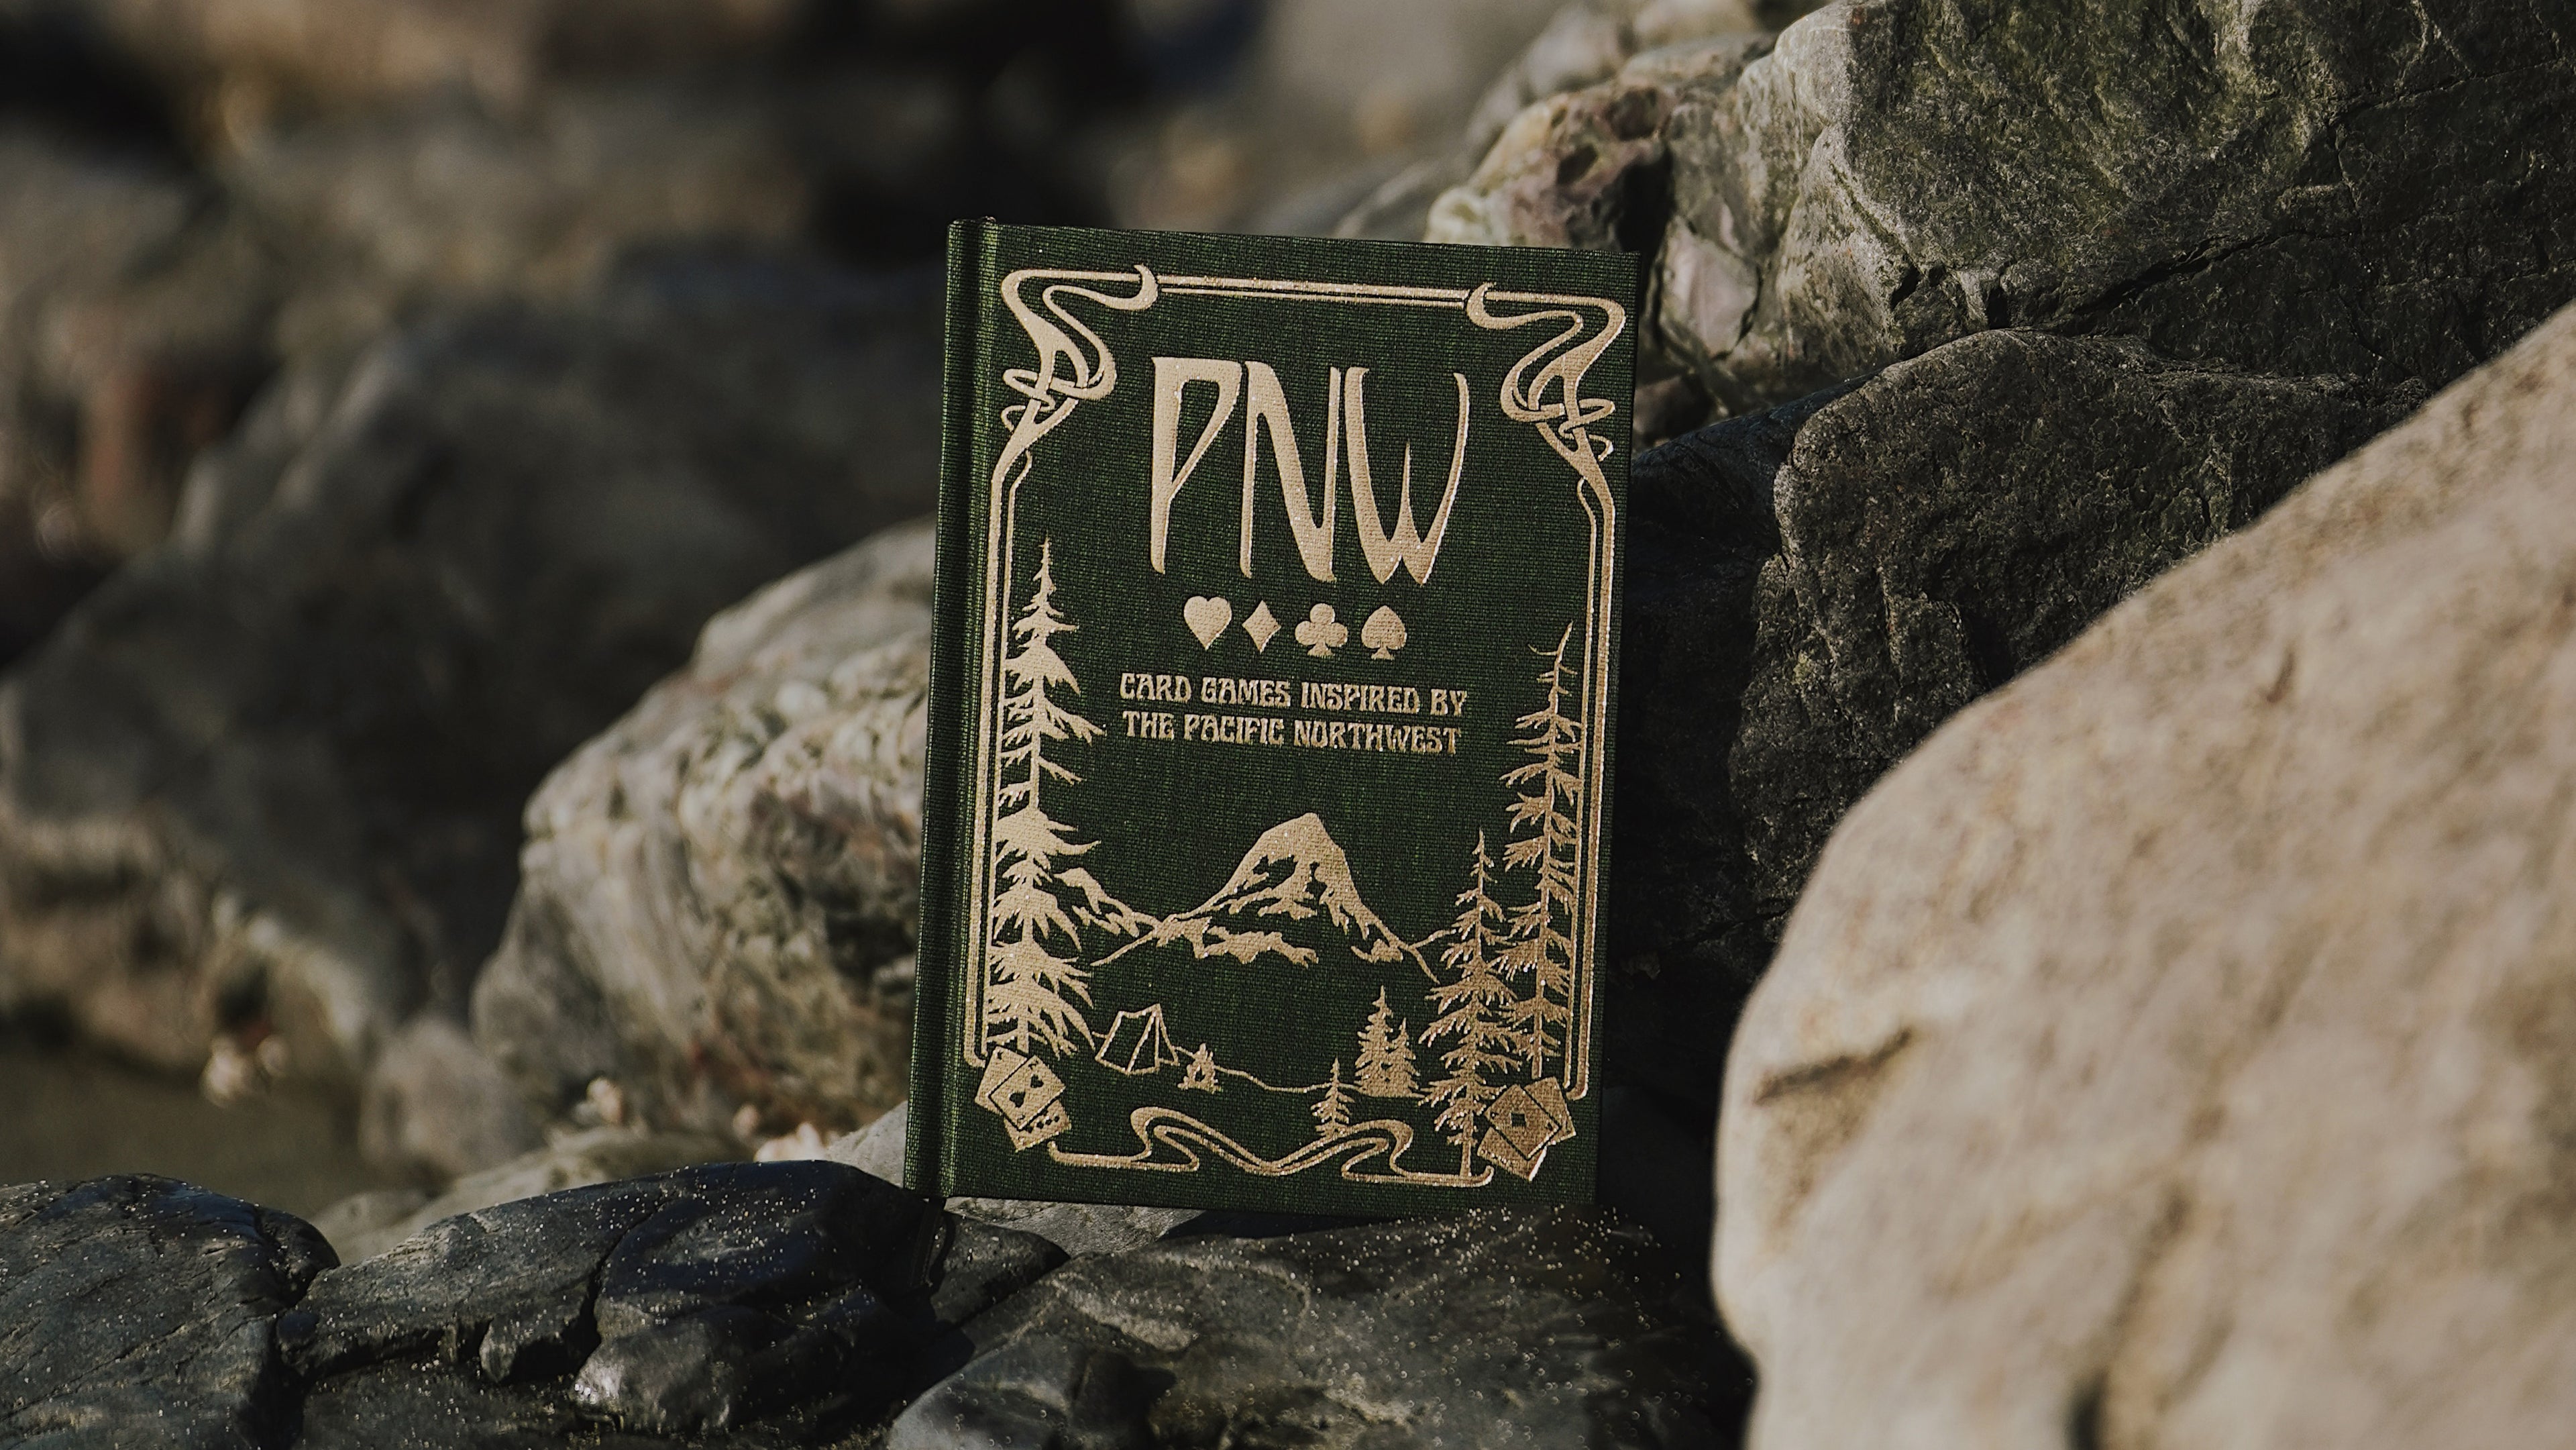 Load video: Hardcover linen book opened and thumbed through over a Pacific Northwest beach.